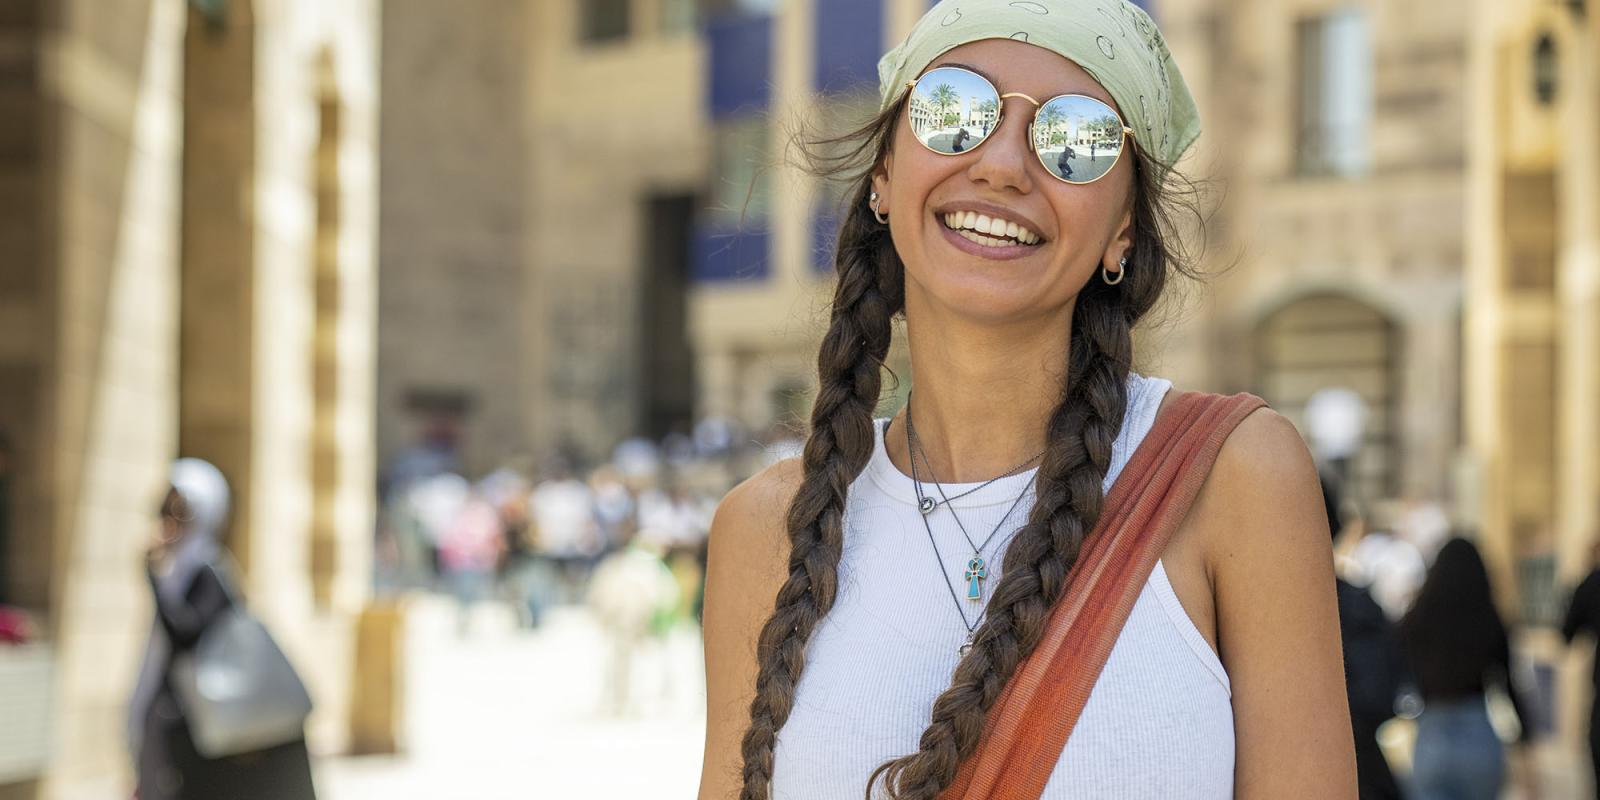 Girl wearing sunglasses and a head bandana smiling on campus